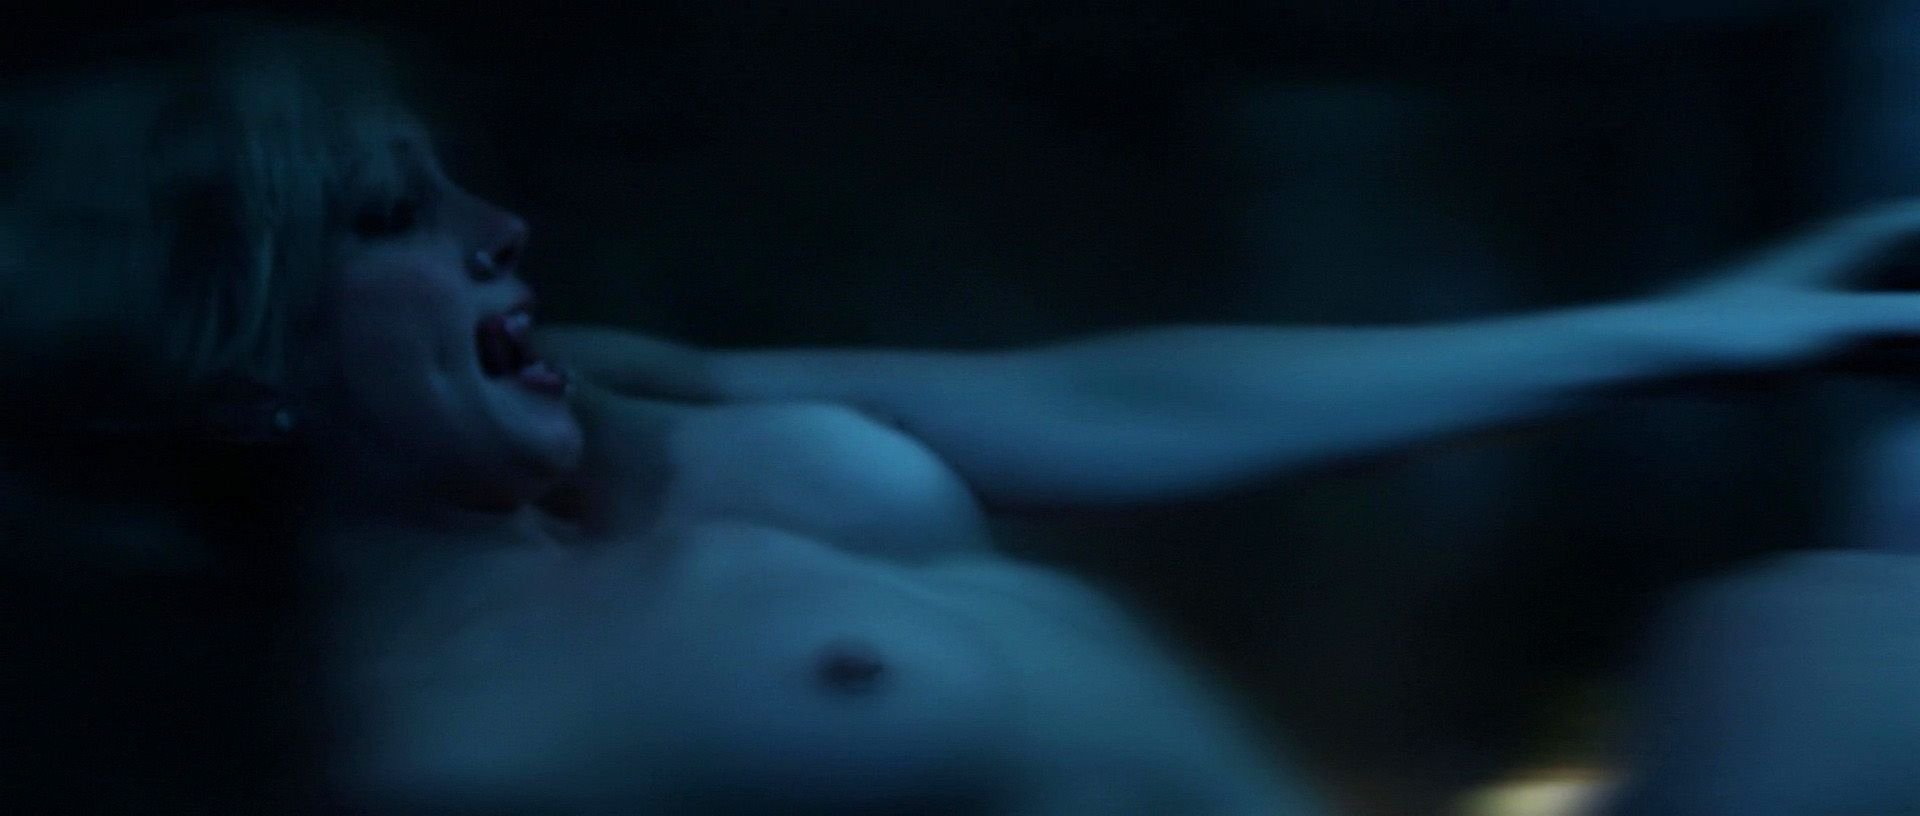 Katie Cassidy’s nude pictures (screenshots), gif, and video from "The Scribbler...